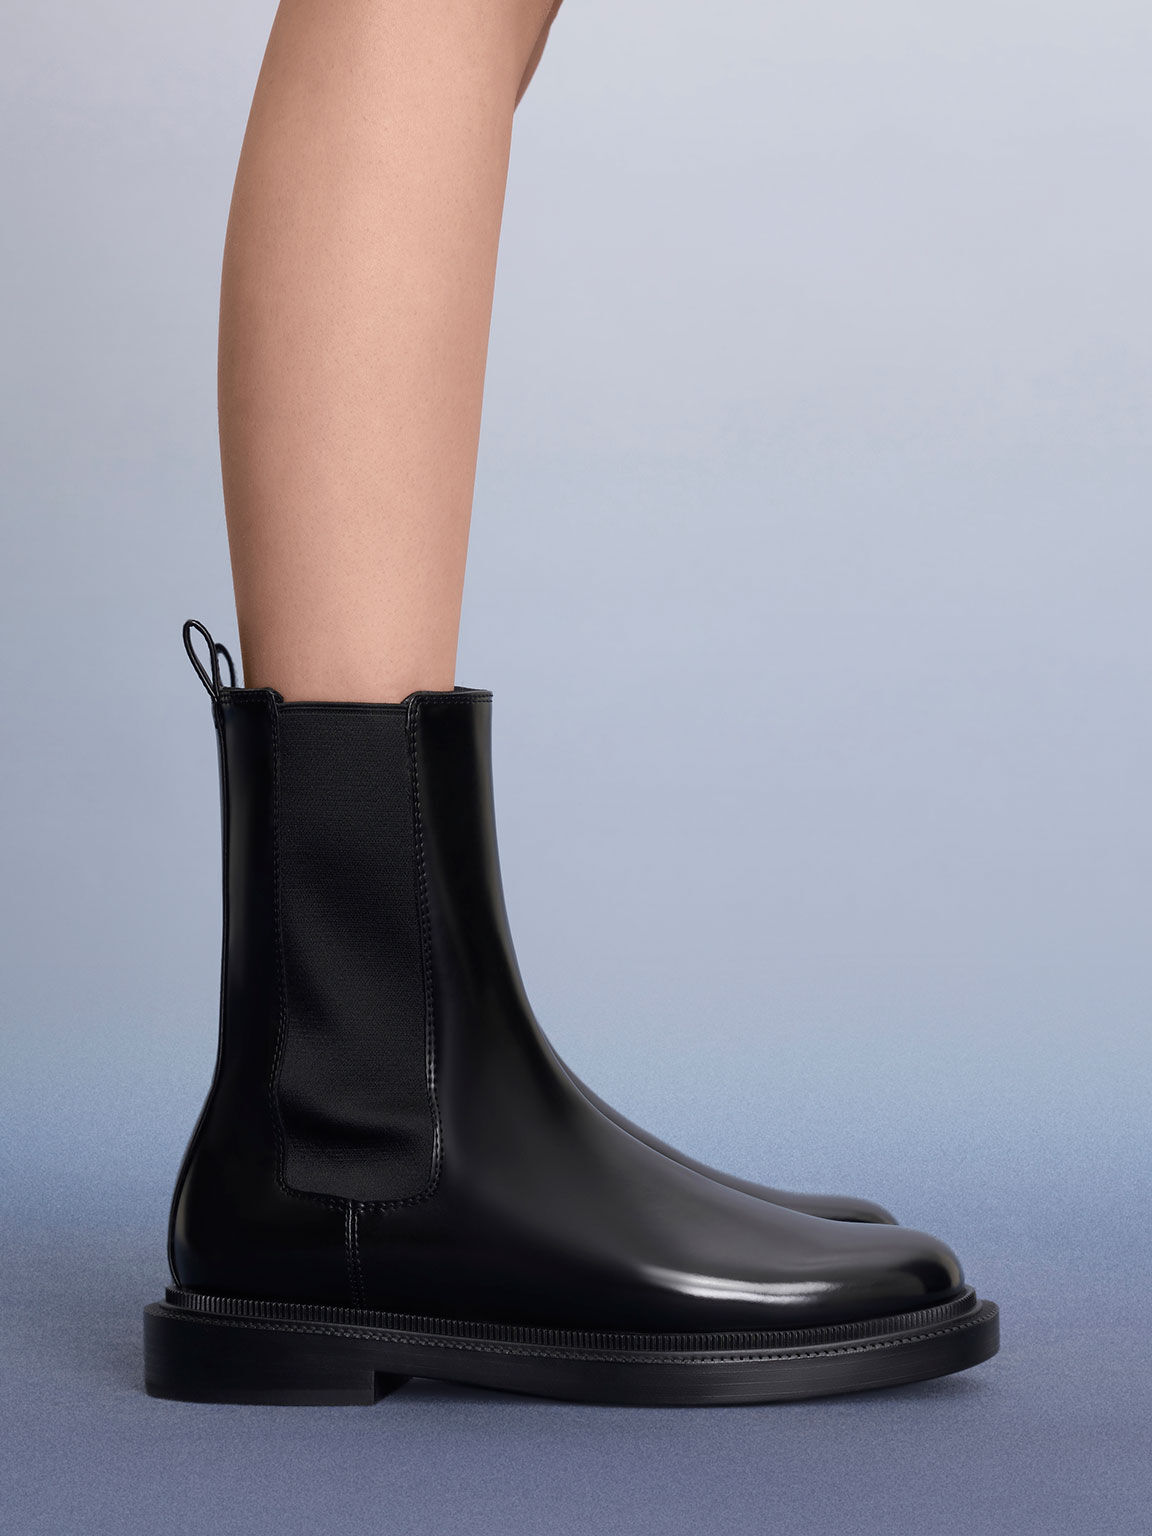 Black Chelsea Boots - CHARLES & KEITH